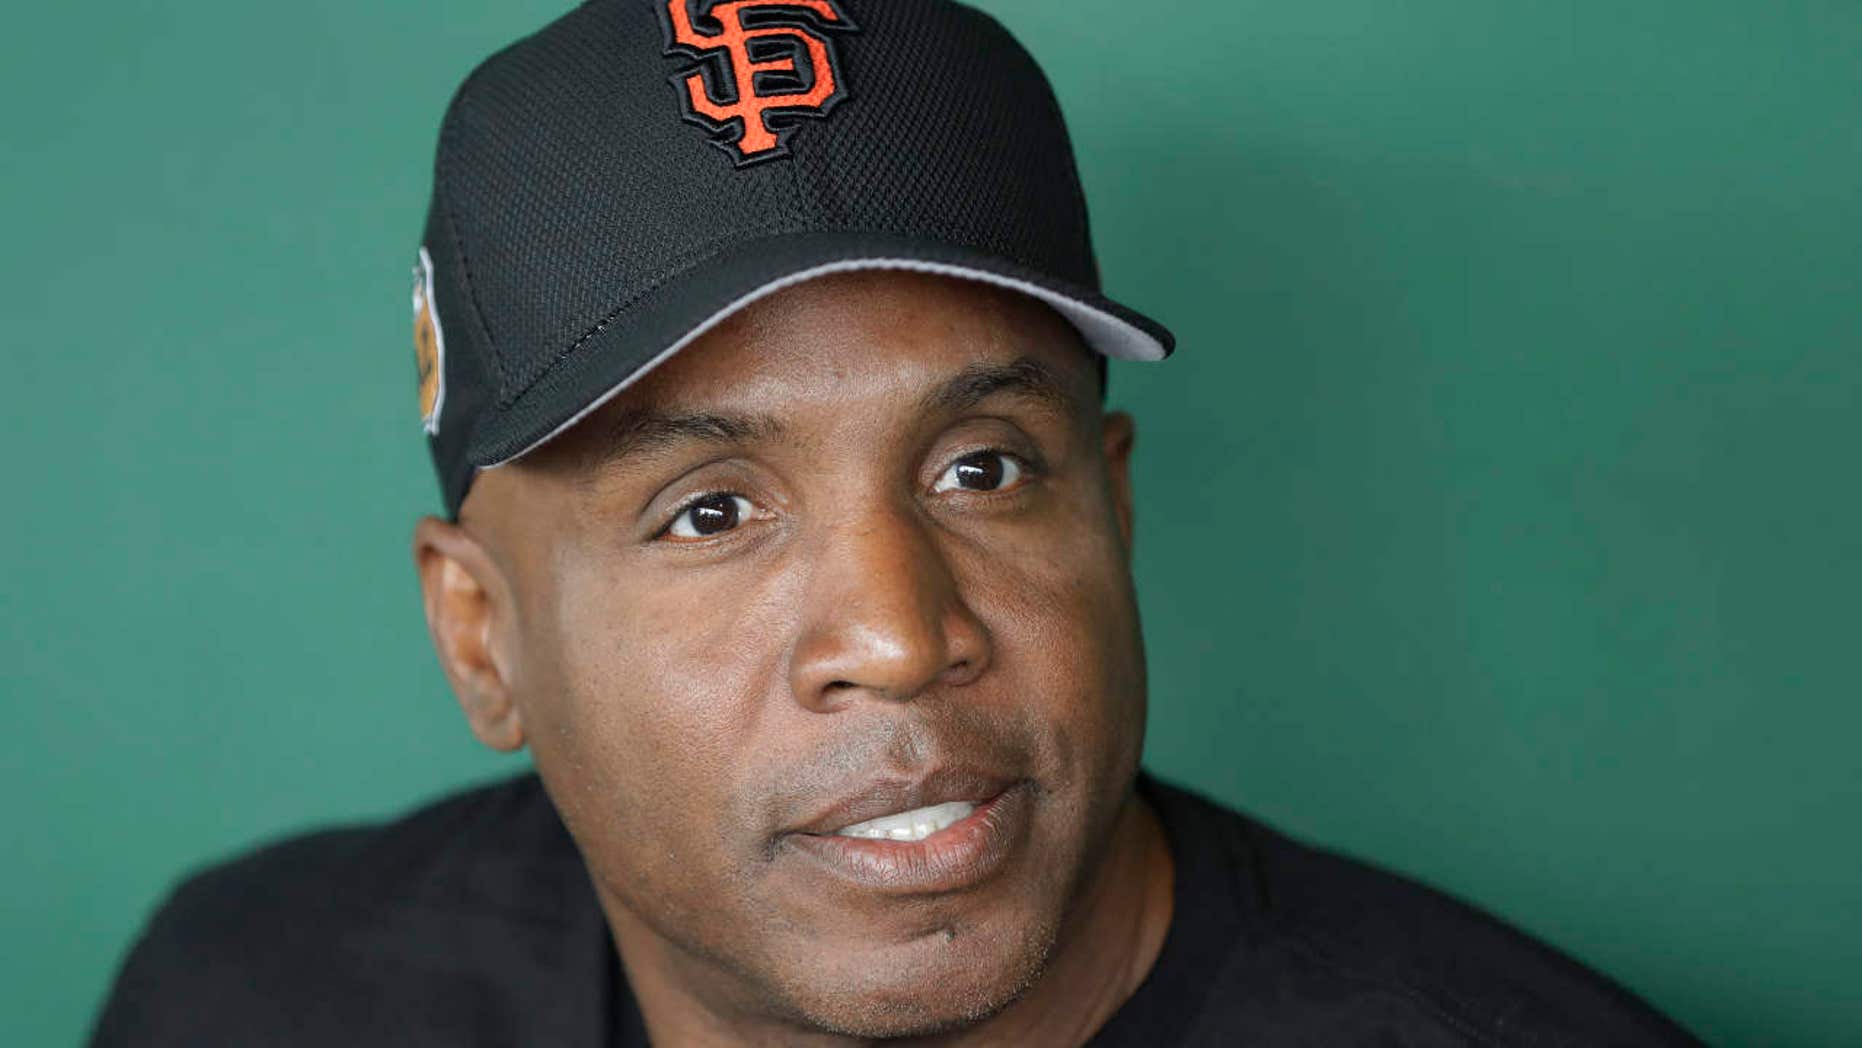 Barry Bonds wishes he had played one more year | Fox News